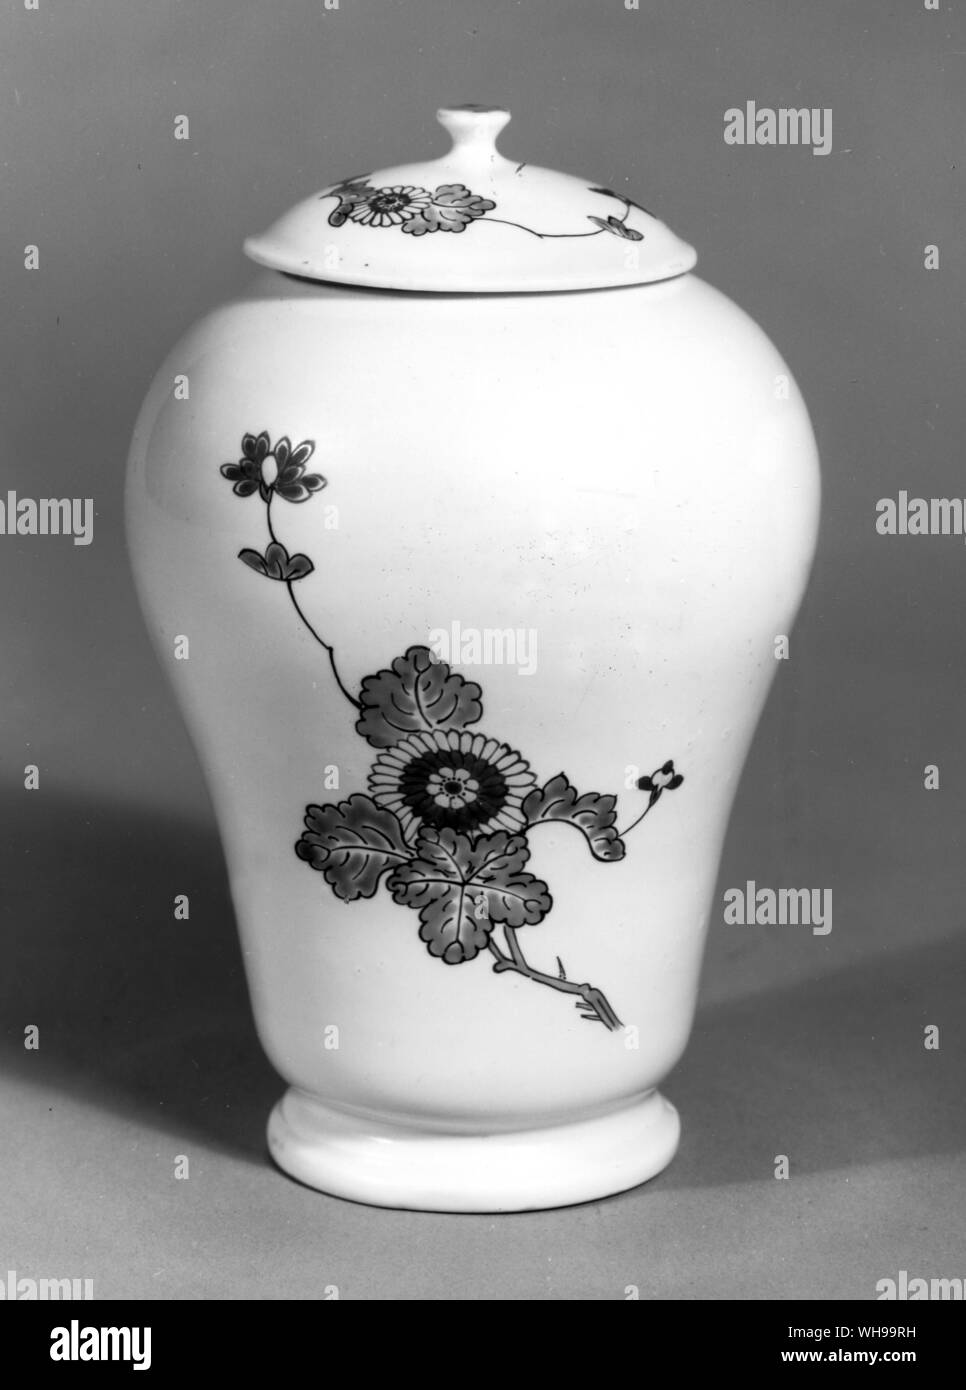 Chantilly jar with scattered Kakiemon-type designs Stock Photo